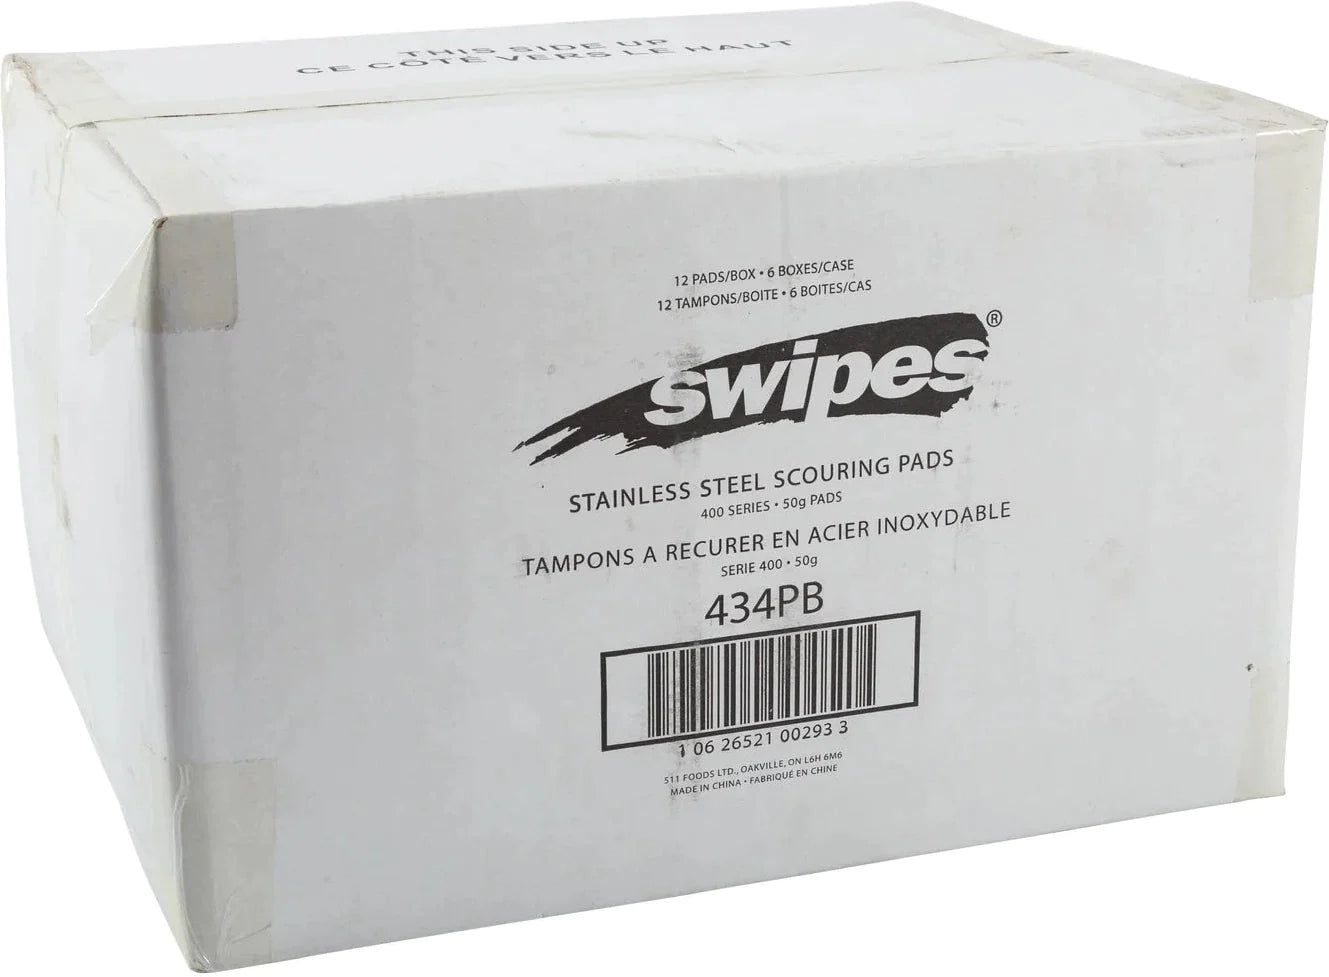 Swipes - Large Stainless Steel Scouring Pads, 12/Pk - 434PB